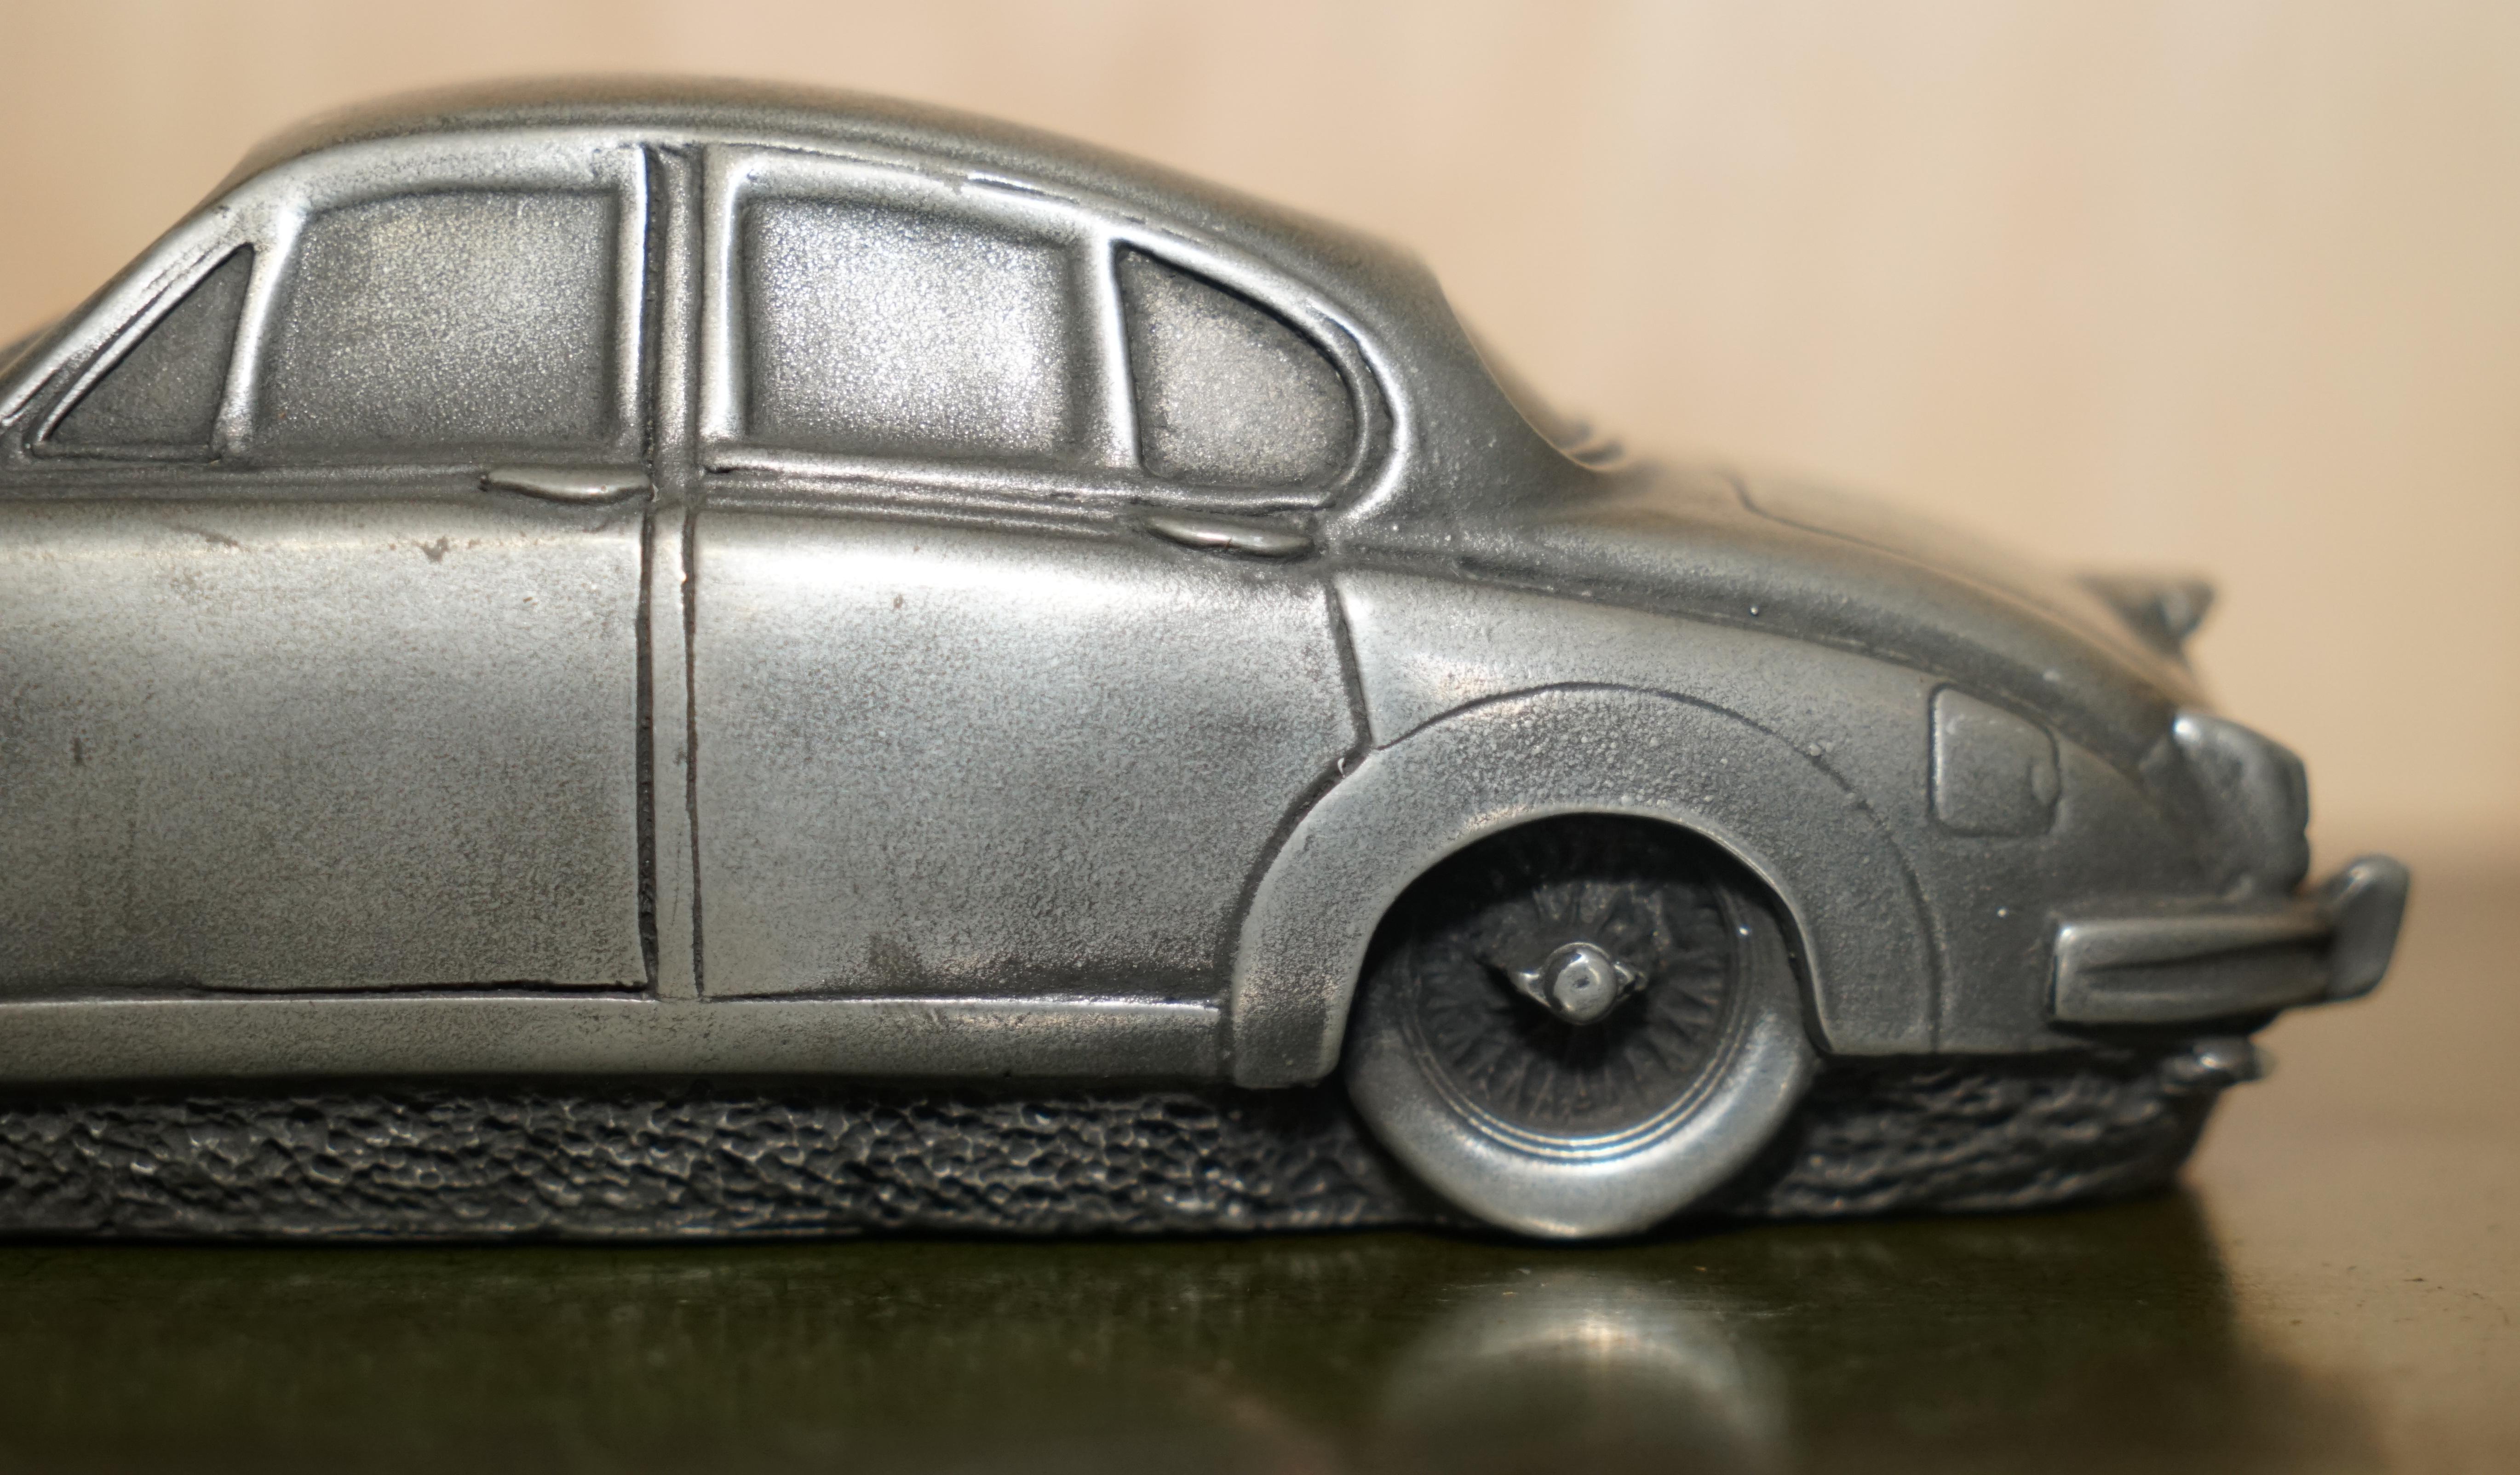 20th Century Compulsion Gallery Pewter Jaguar 1955-1959 Edition Mark i Car Must See Pictures For Sale